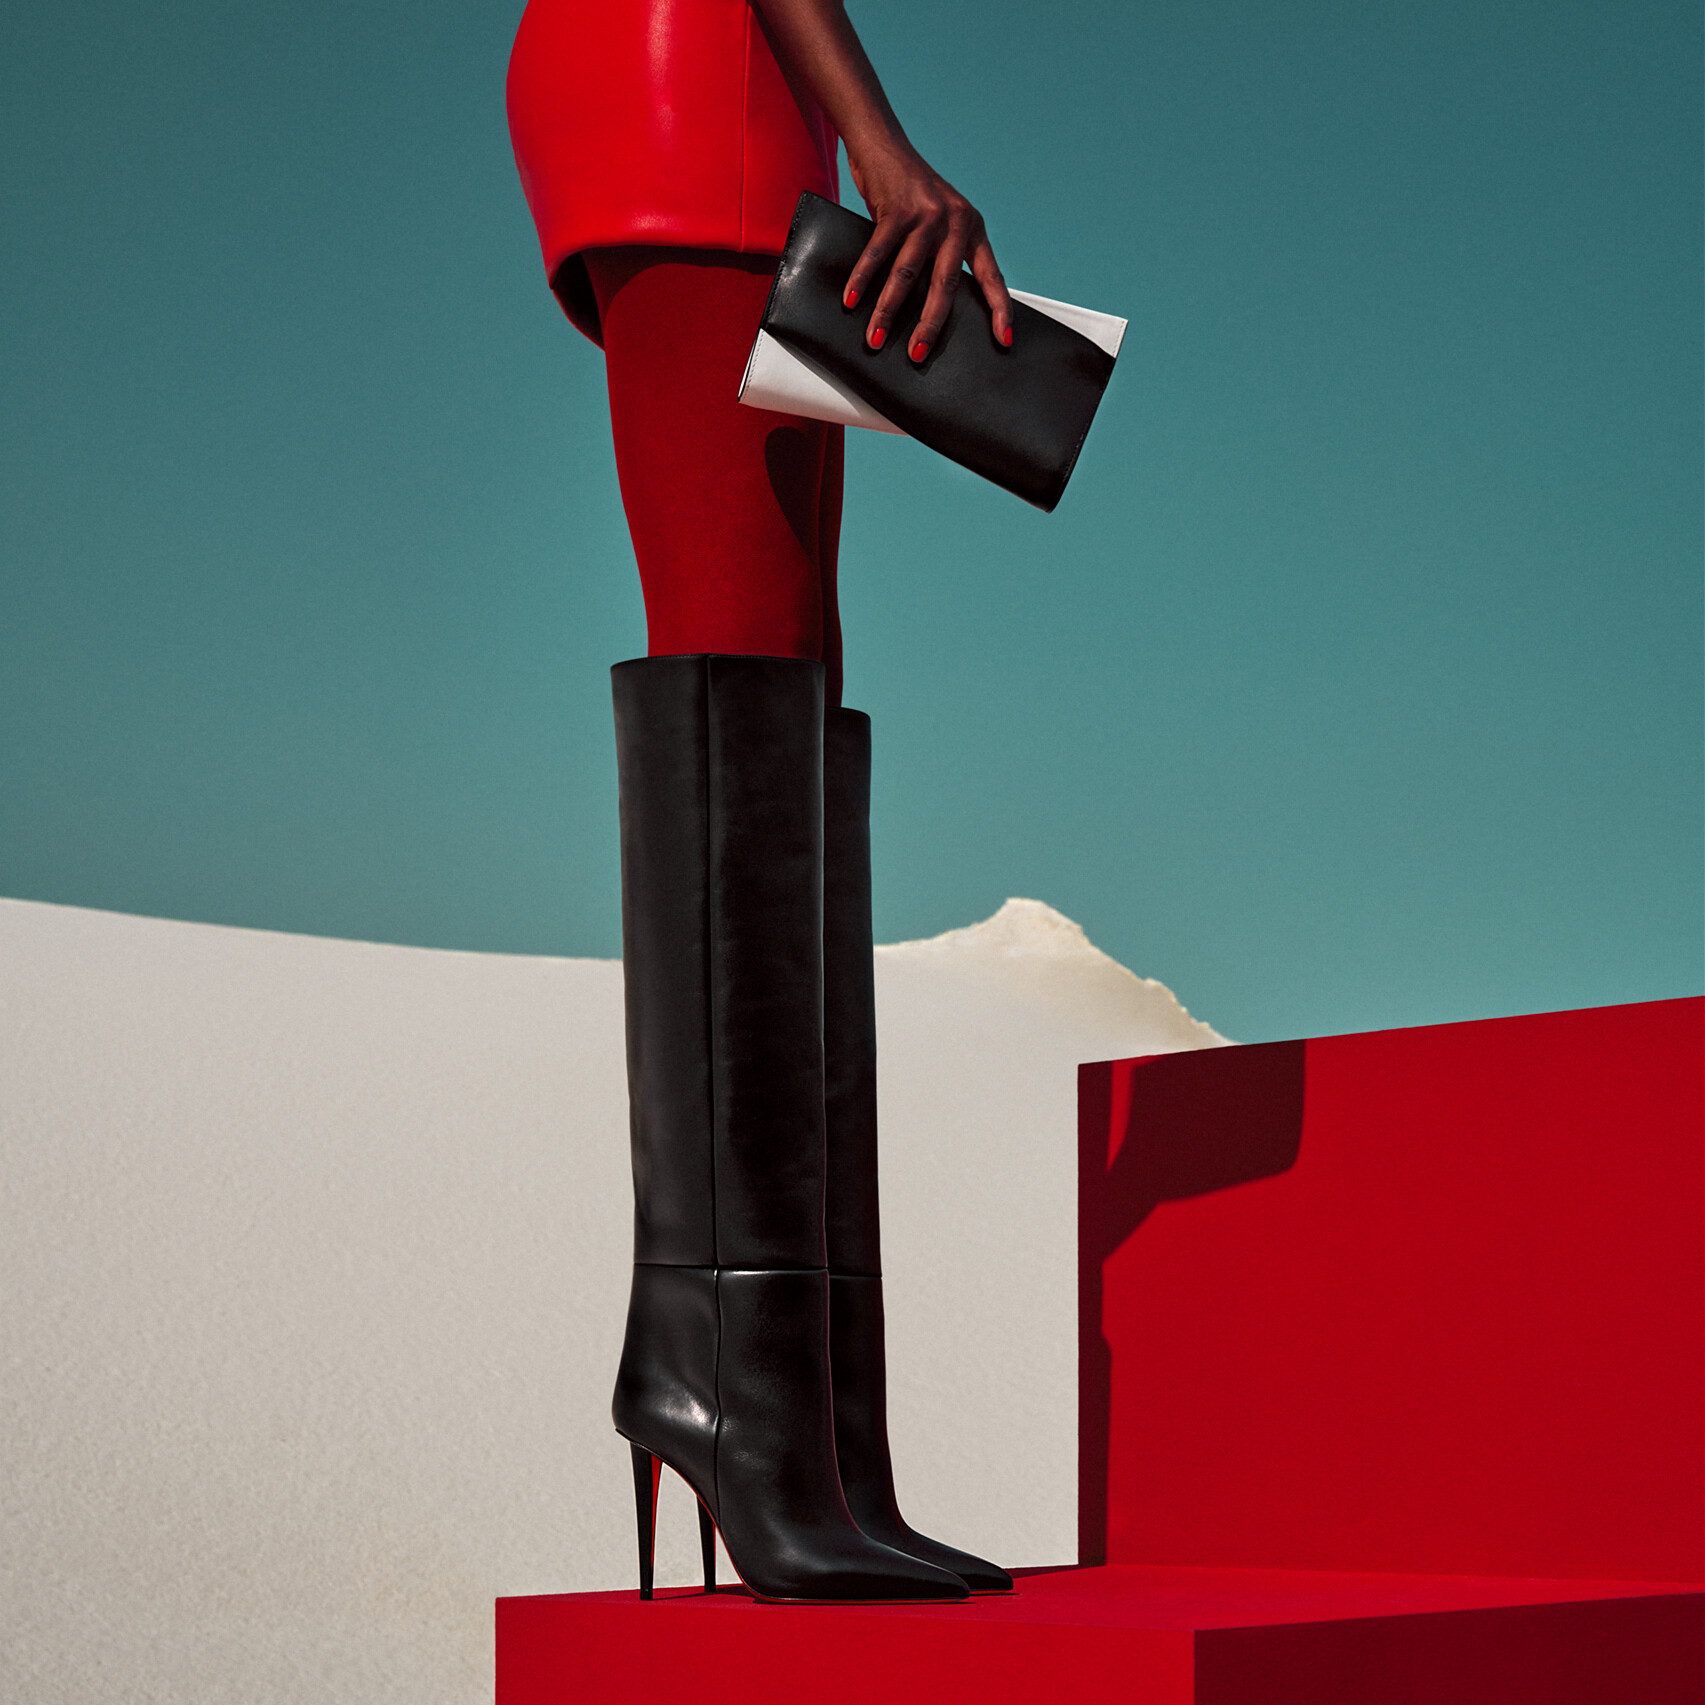 Womens Christian Louboutin Boots, Red Sole Boots